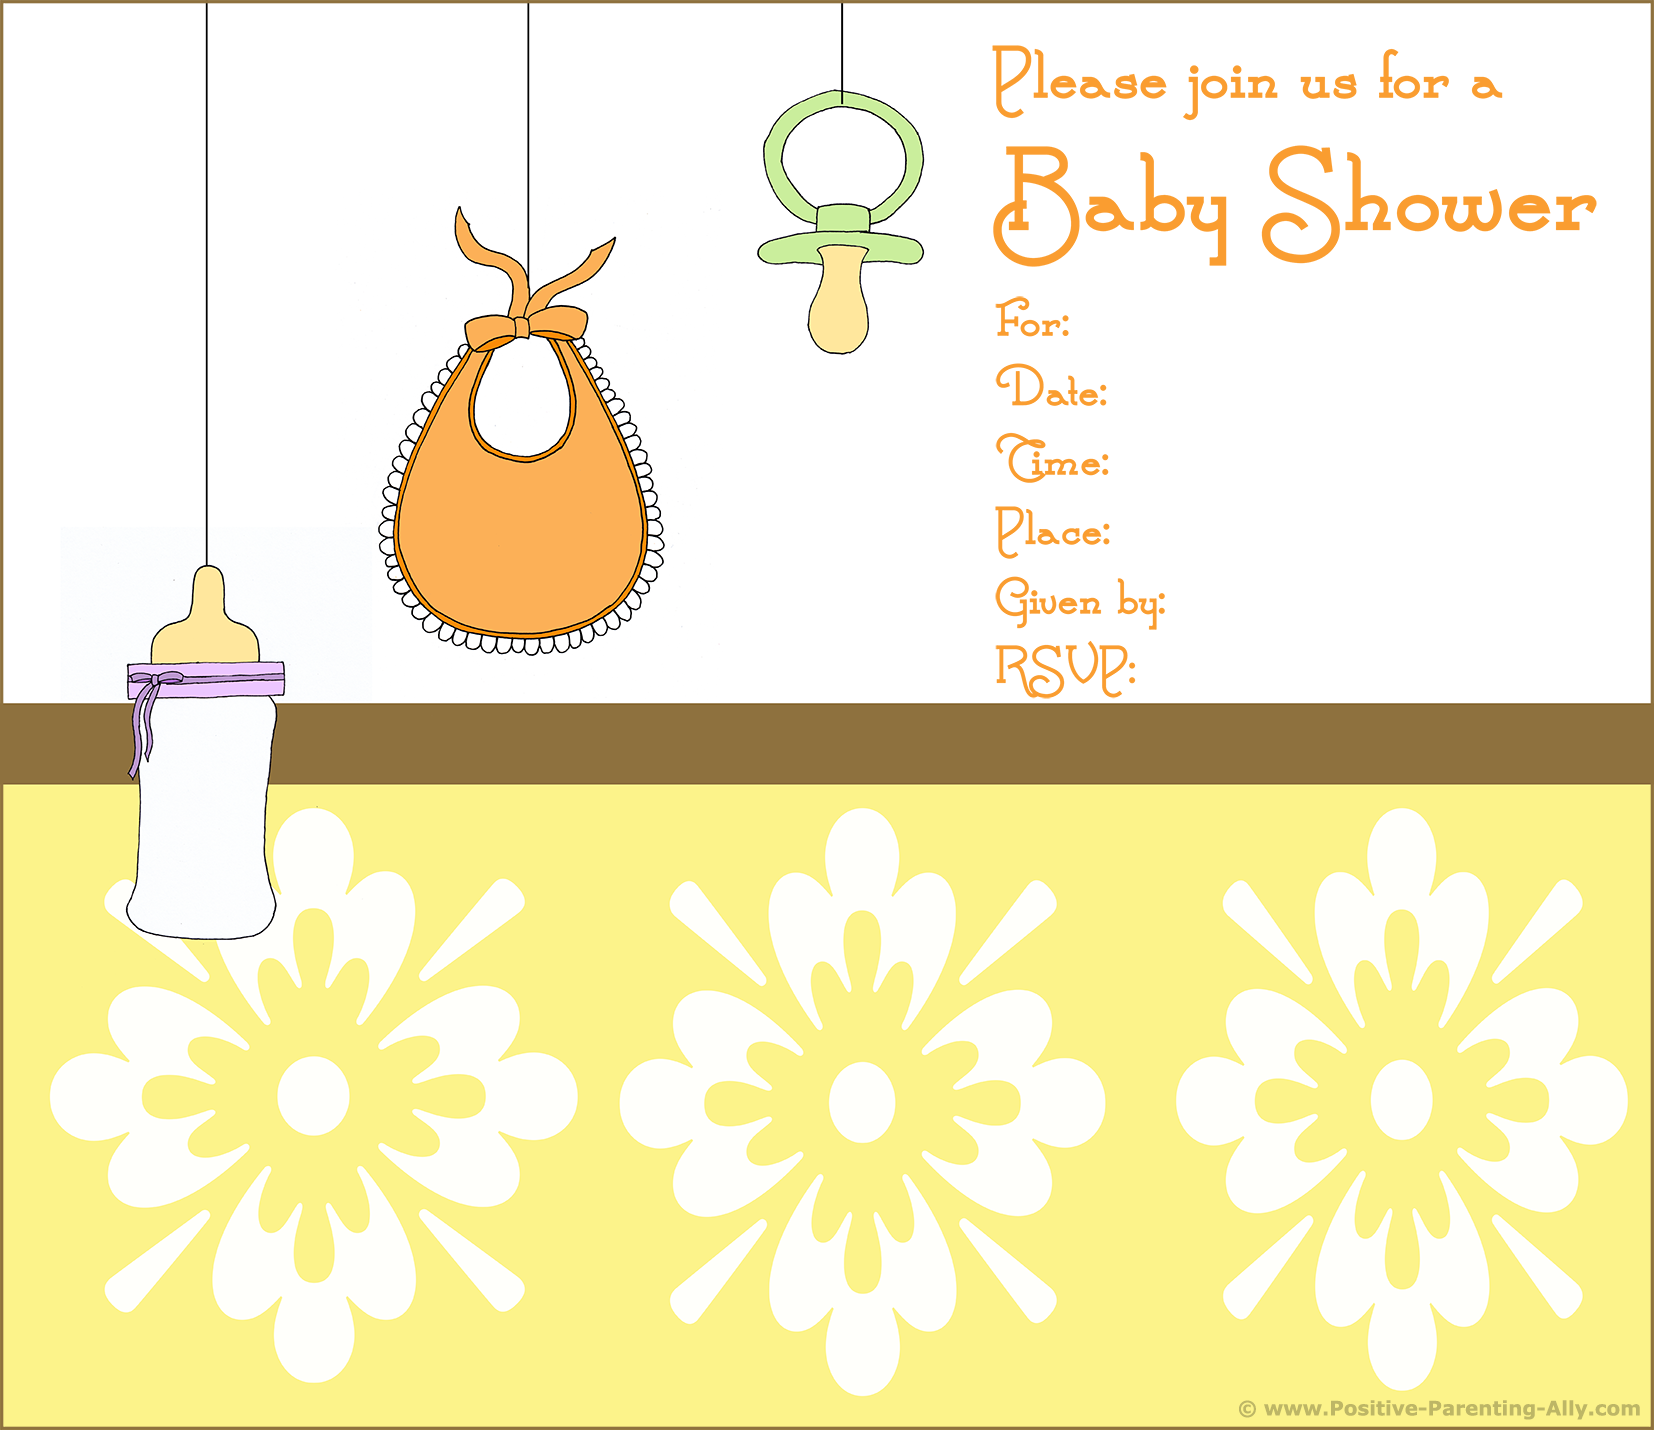 Free Printable Baby Shower Invitations In High Quality Resolution